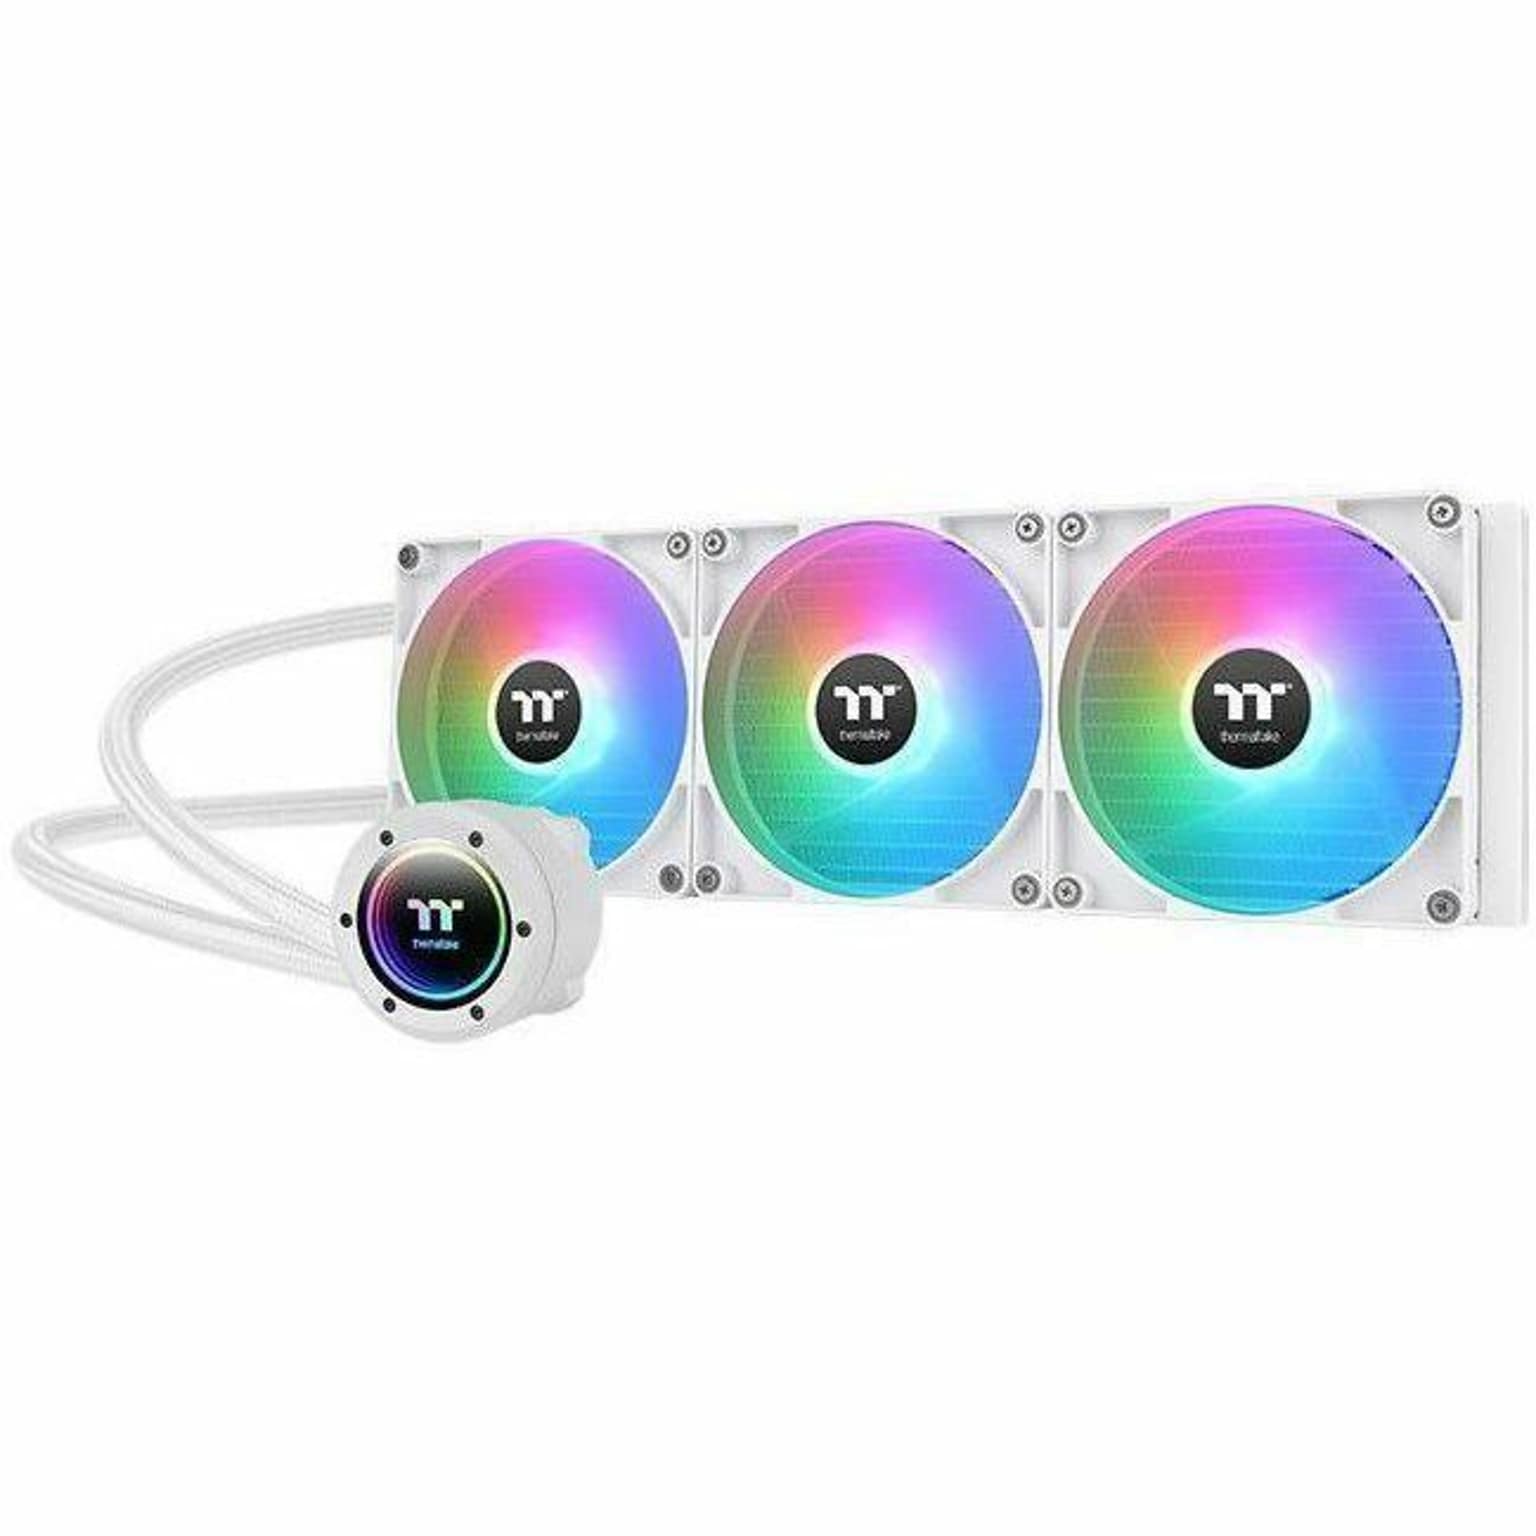 Thermaltake TH420 V2 ARGB Sync 140mm Cooling Fan/Radiator/Water Block/Pump with RGB Lighting (CLW378PL14SWA)